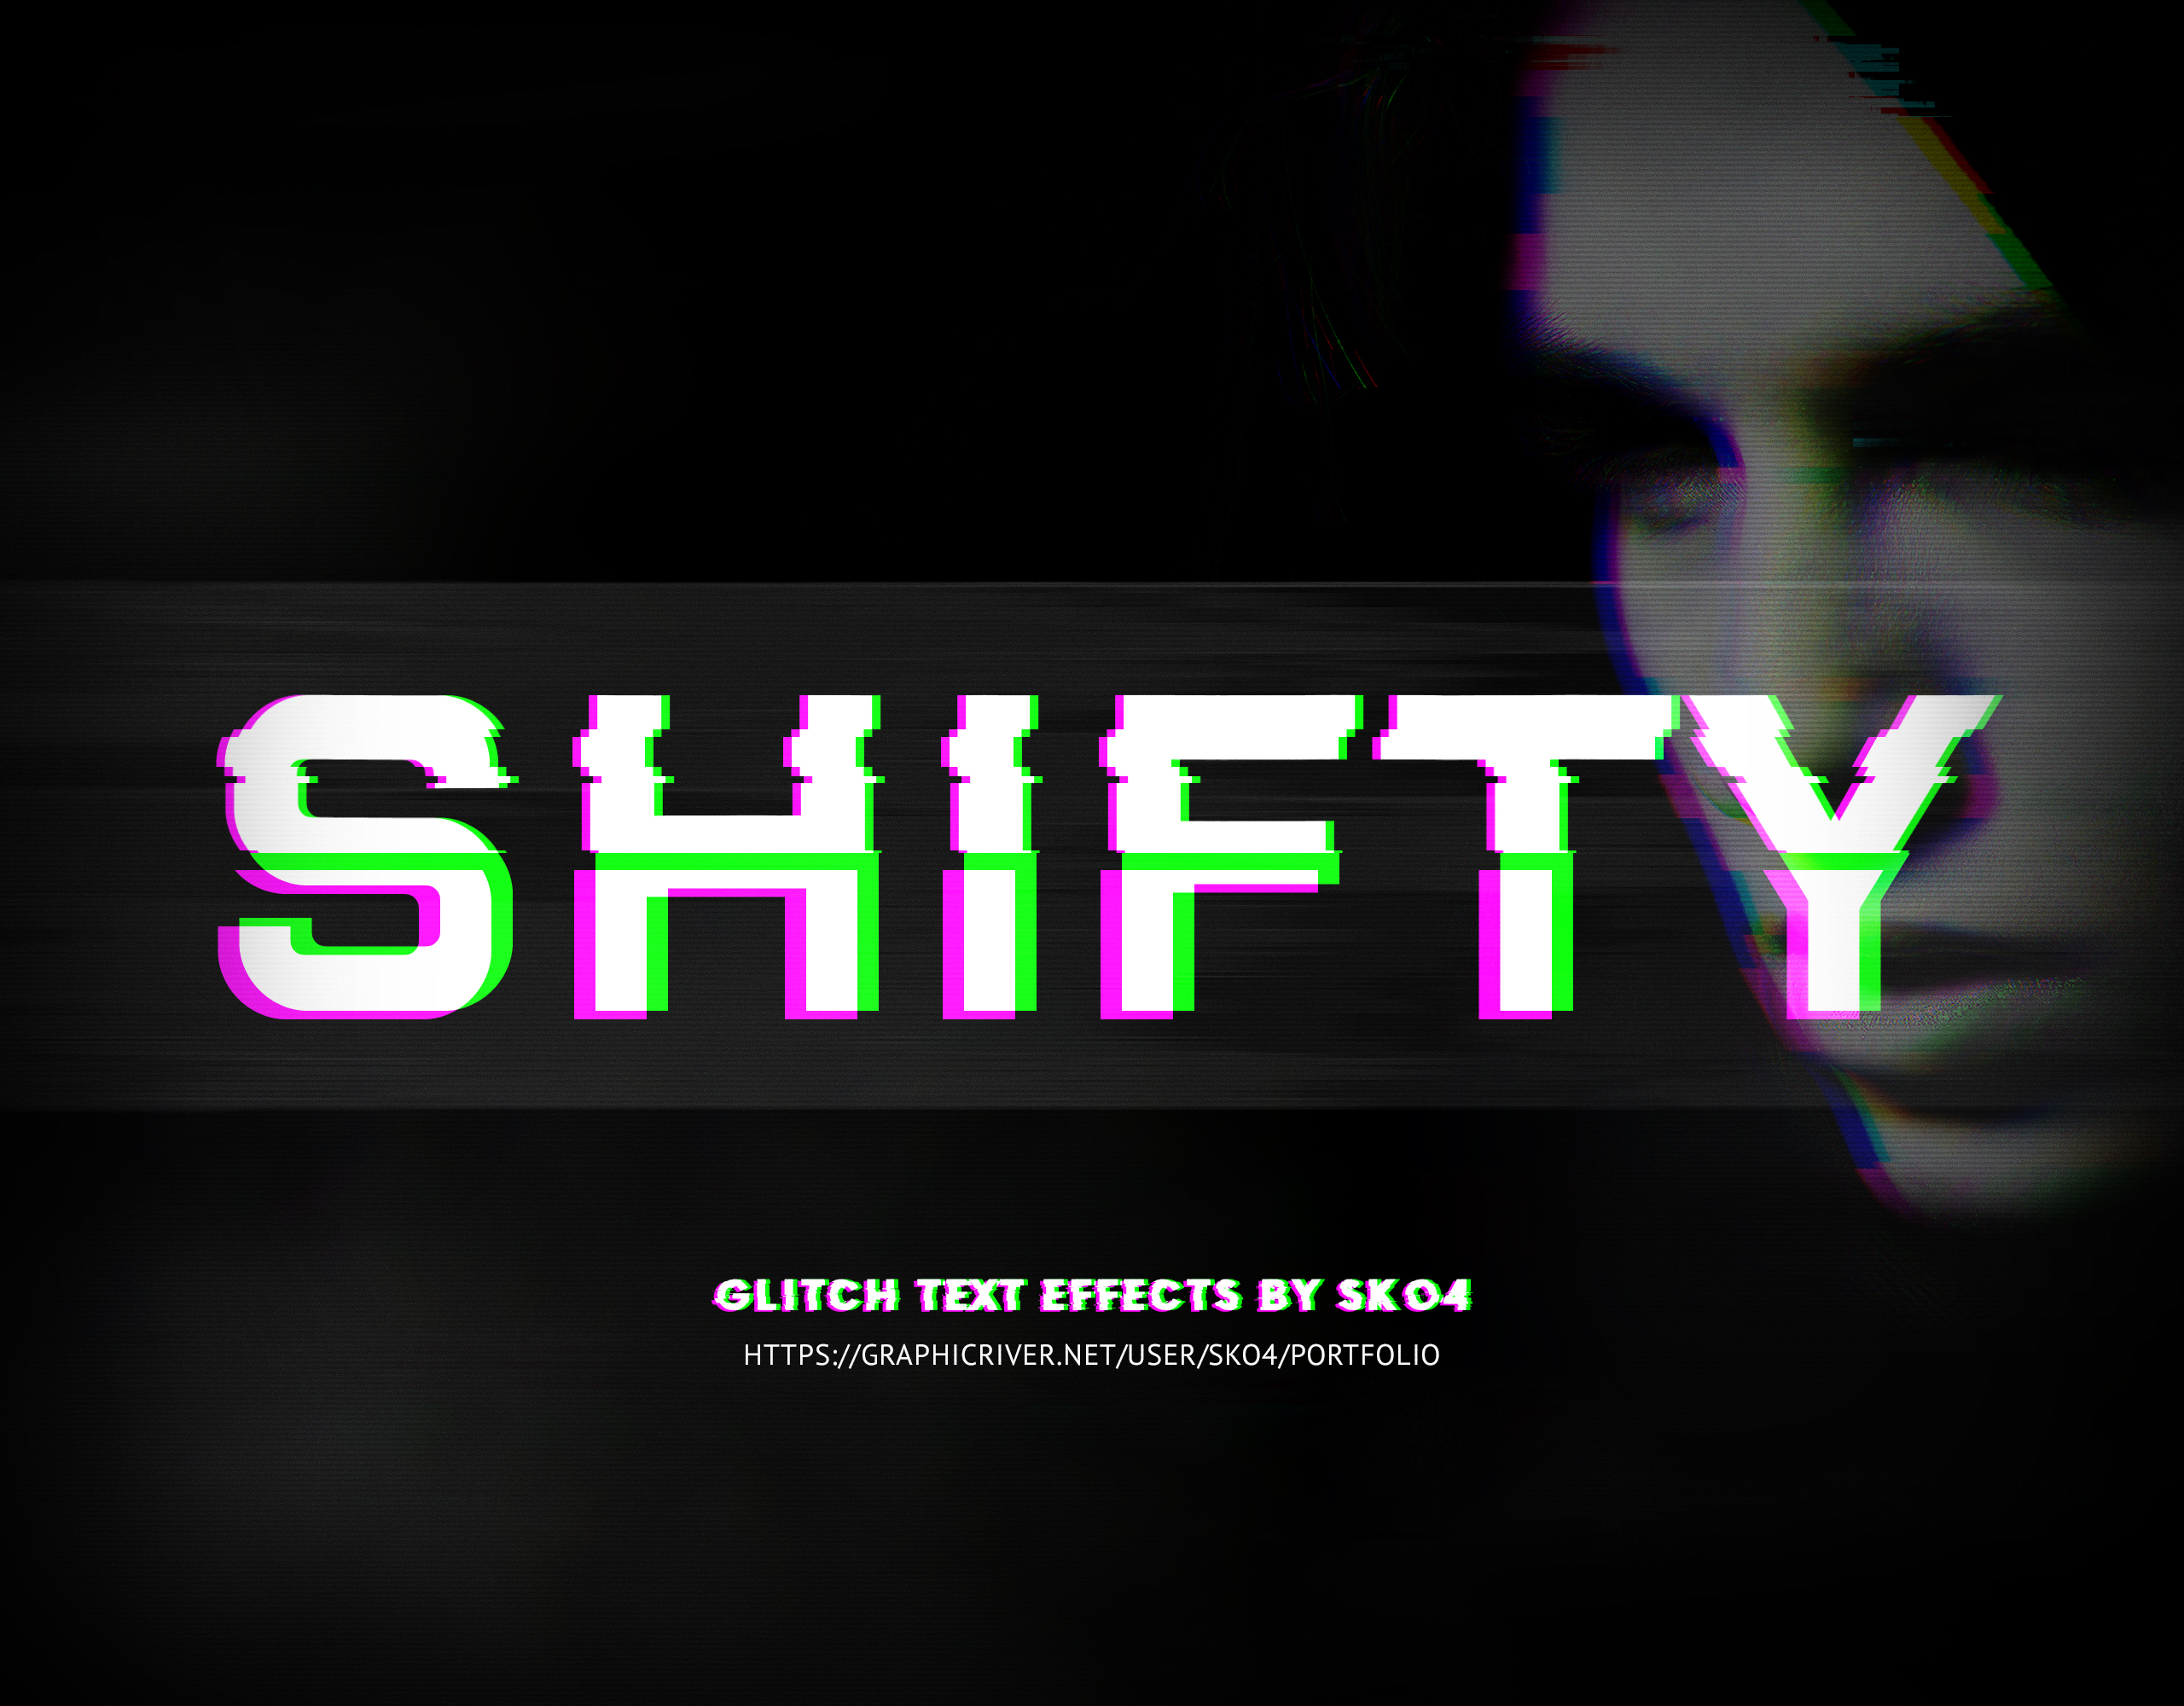 Glitch effect after effects. Глитч текст. Глитч эффект текст. Эффект глитча текст. Glitch эффект в after Effects.